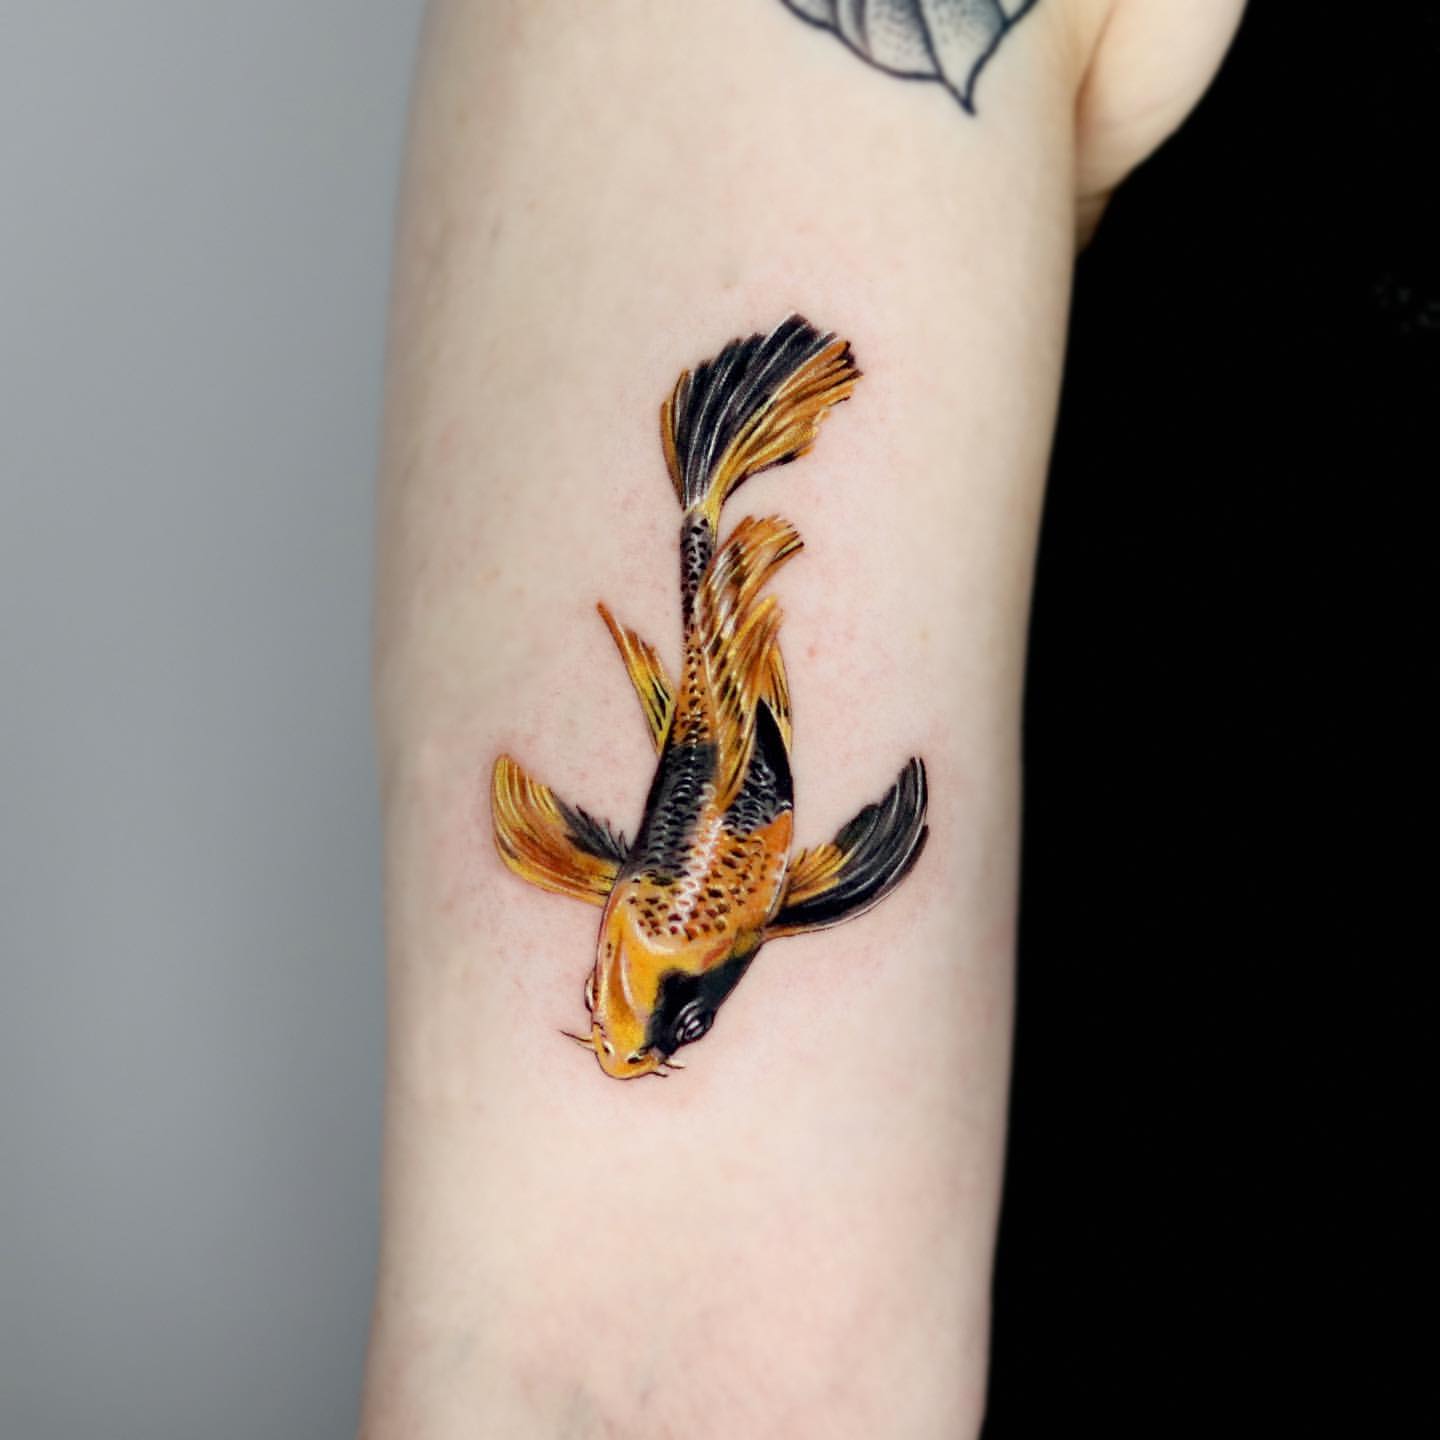 Learn 98+ about small koi fish tattoo super cool .vn